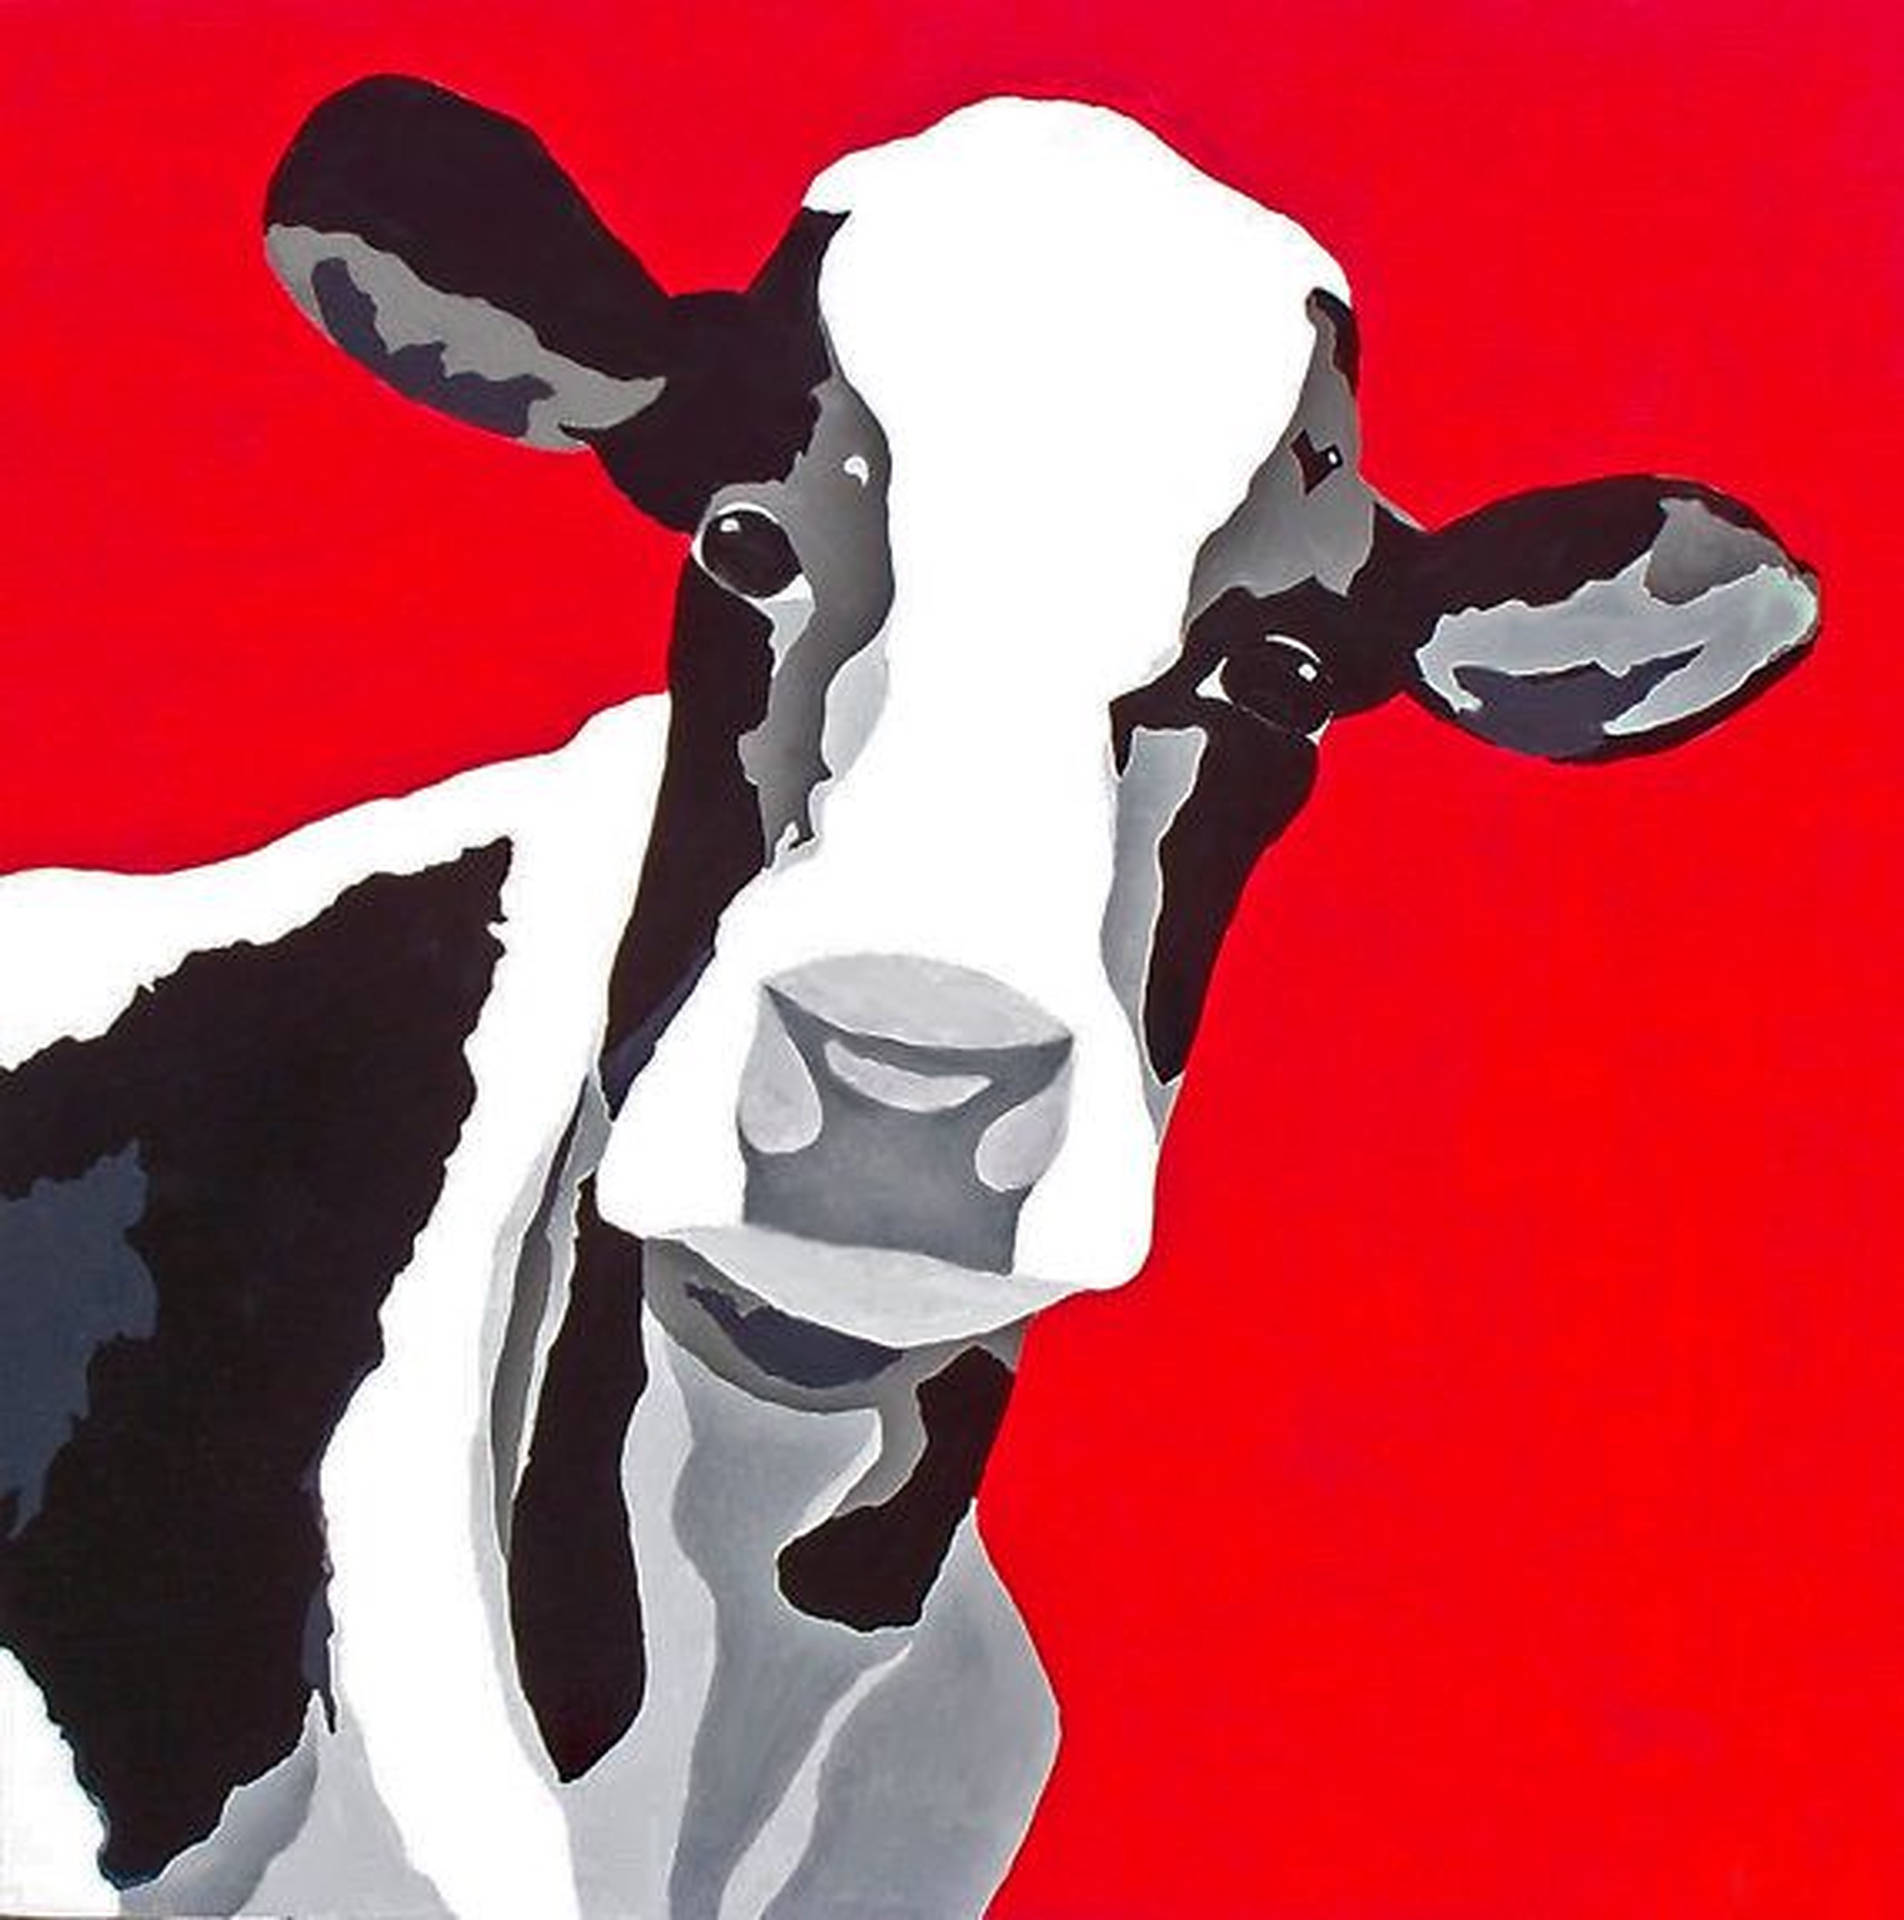 Cow Print Red Painting Background